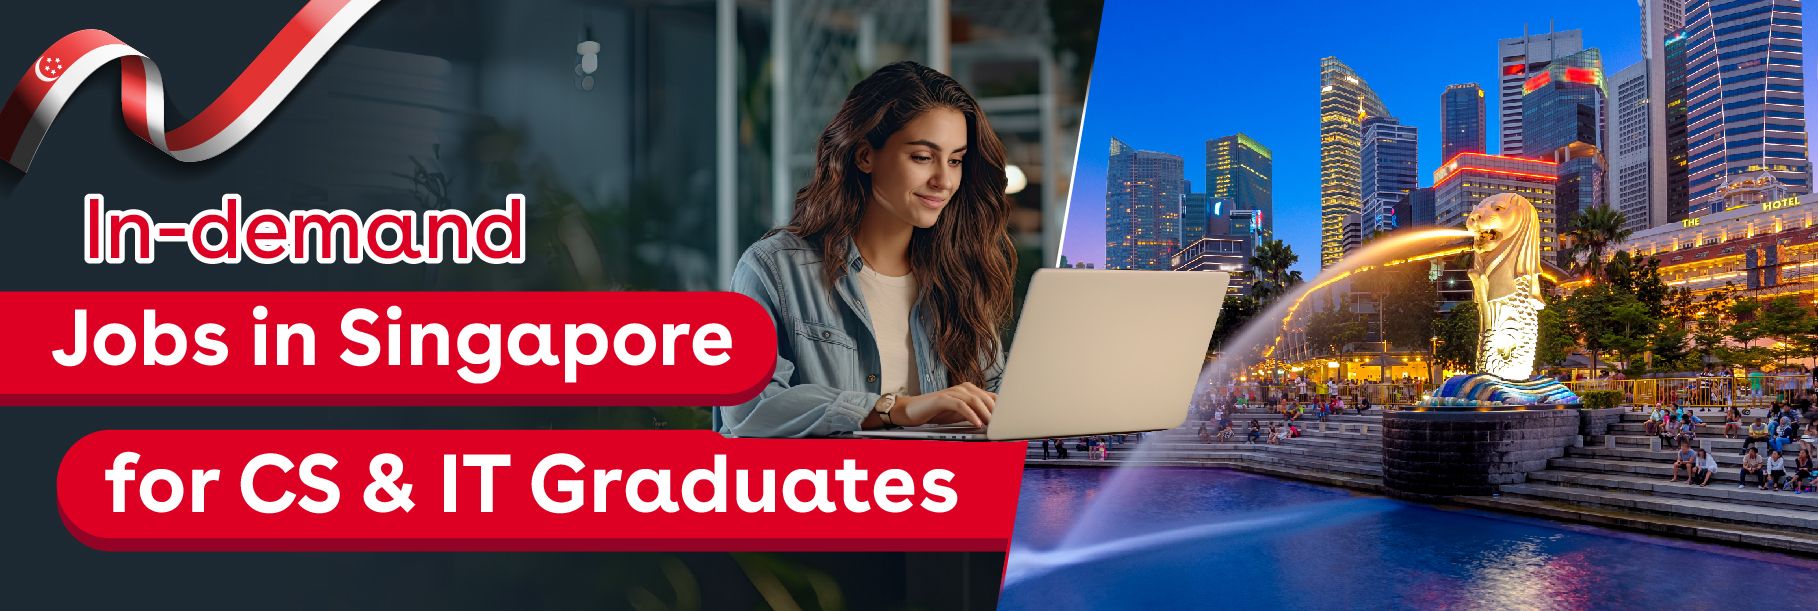 Job Opportunities in Singapore for Masters in Computer Science & IT Graduates